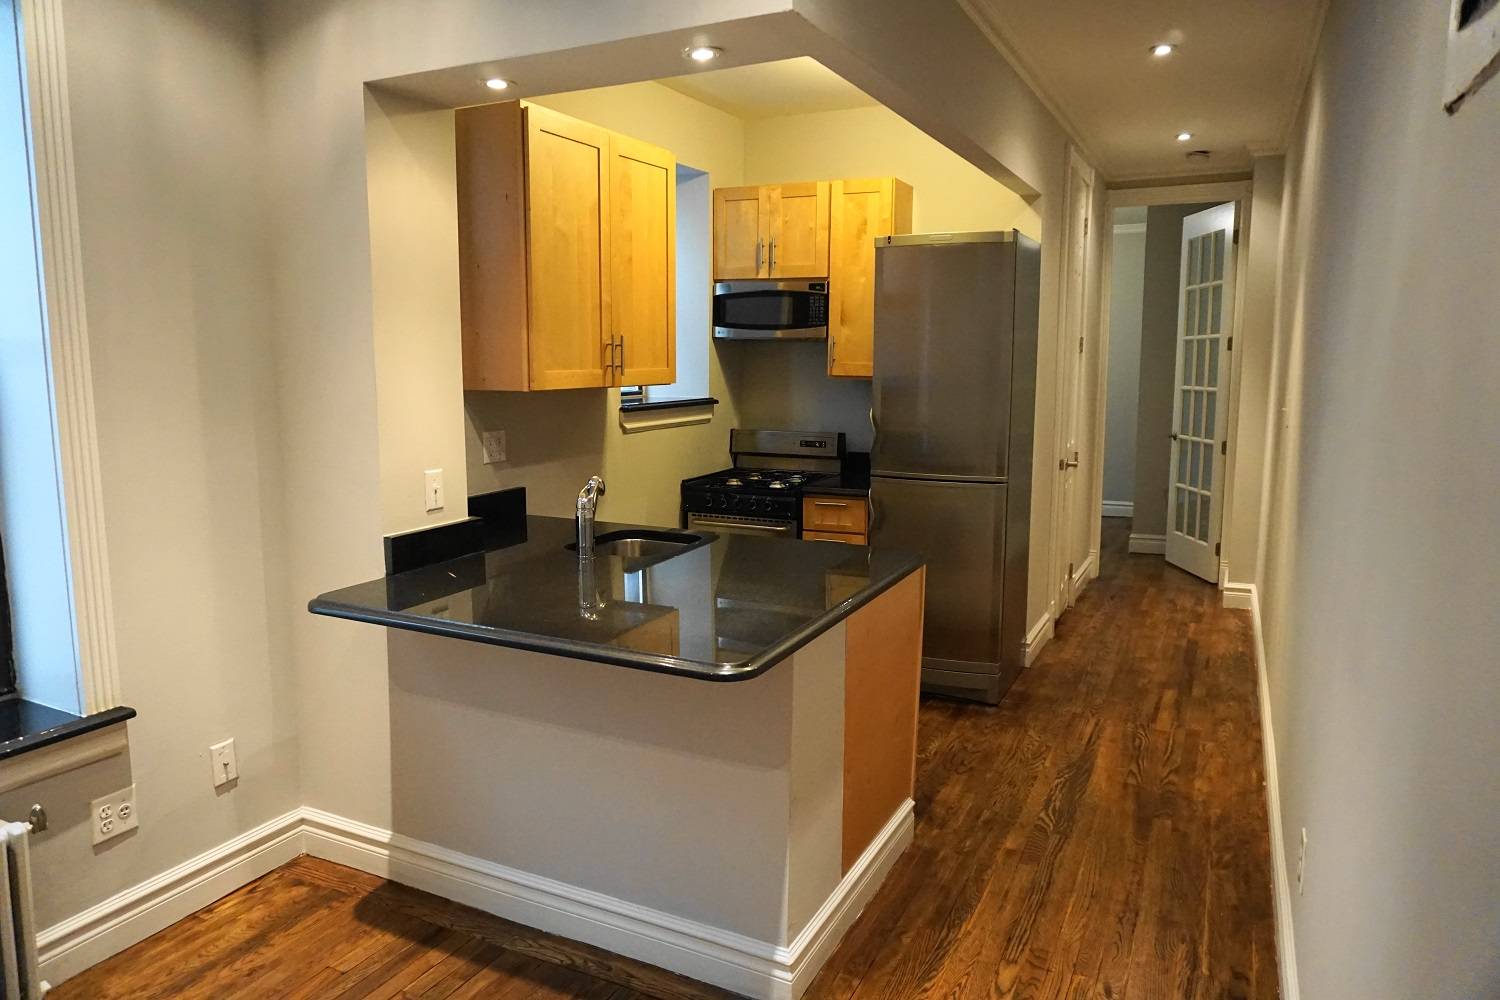 No Fee - Downtown Charm in this Prime SoHo/NoLita 1 Bedroom